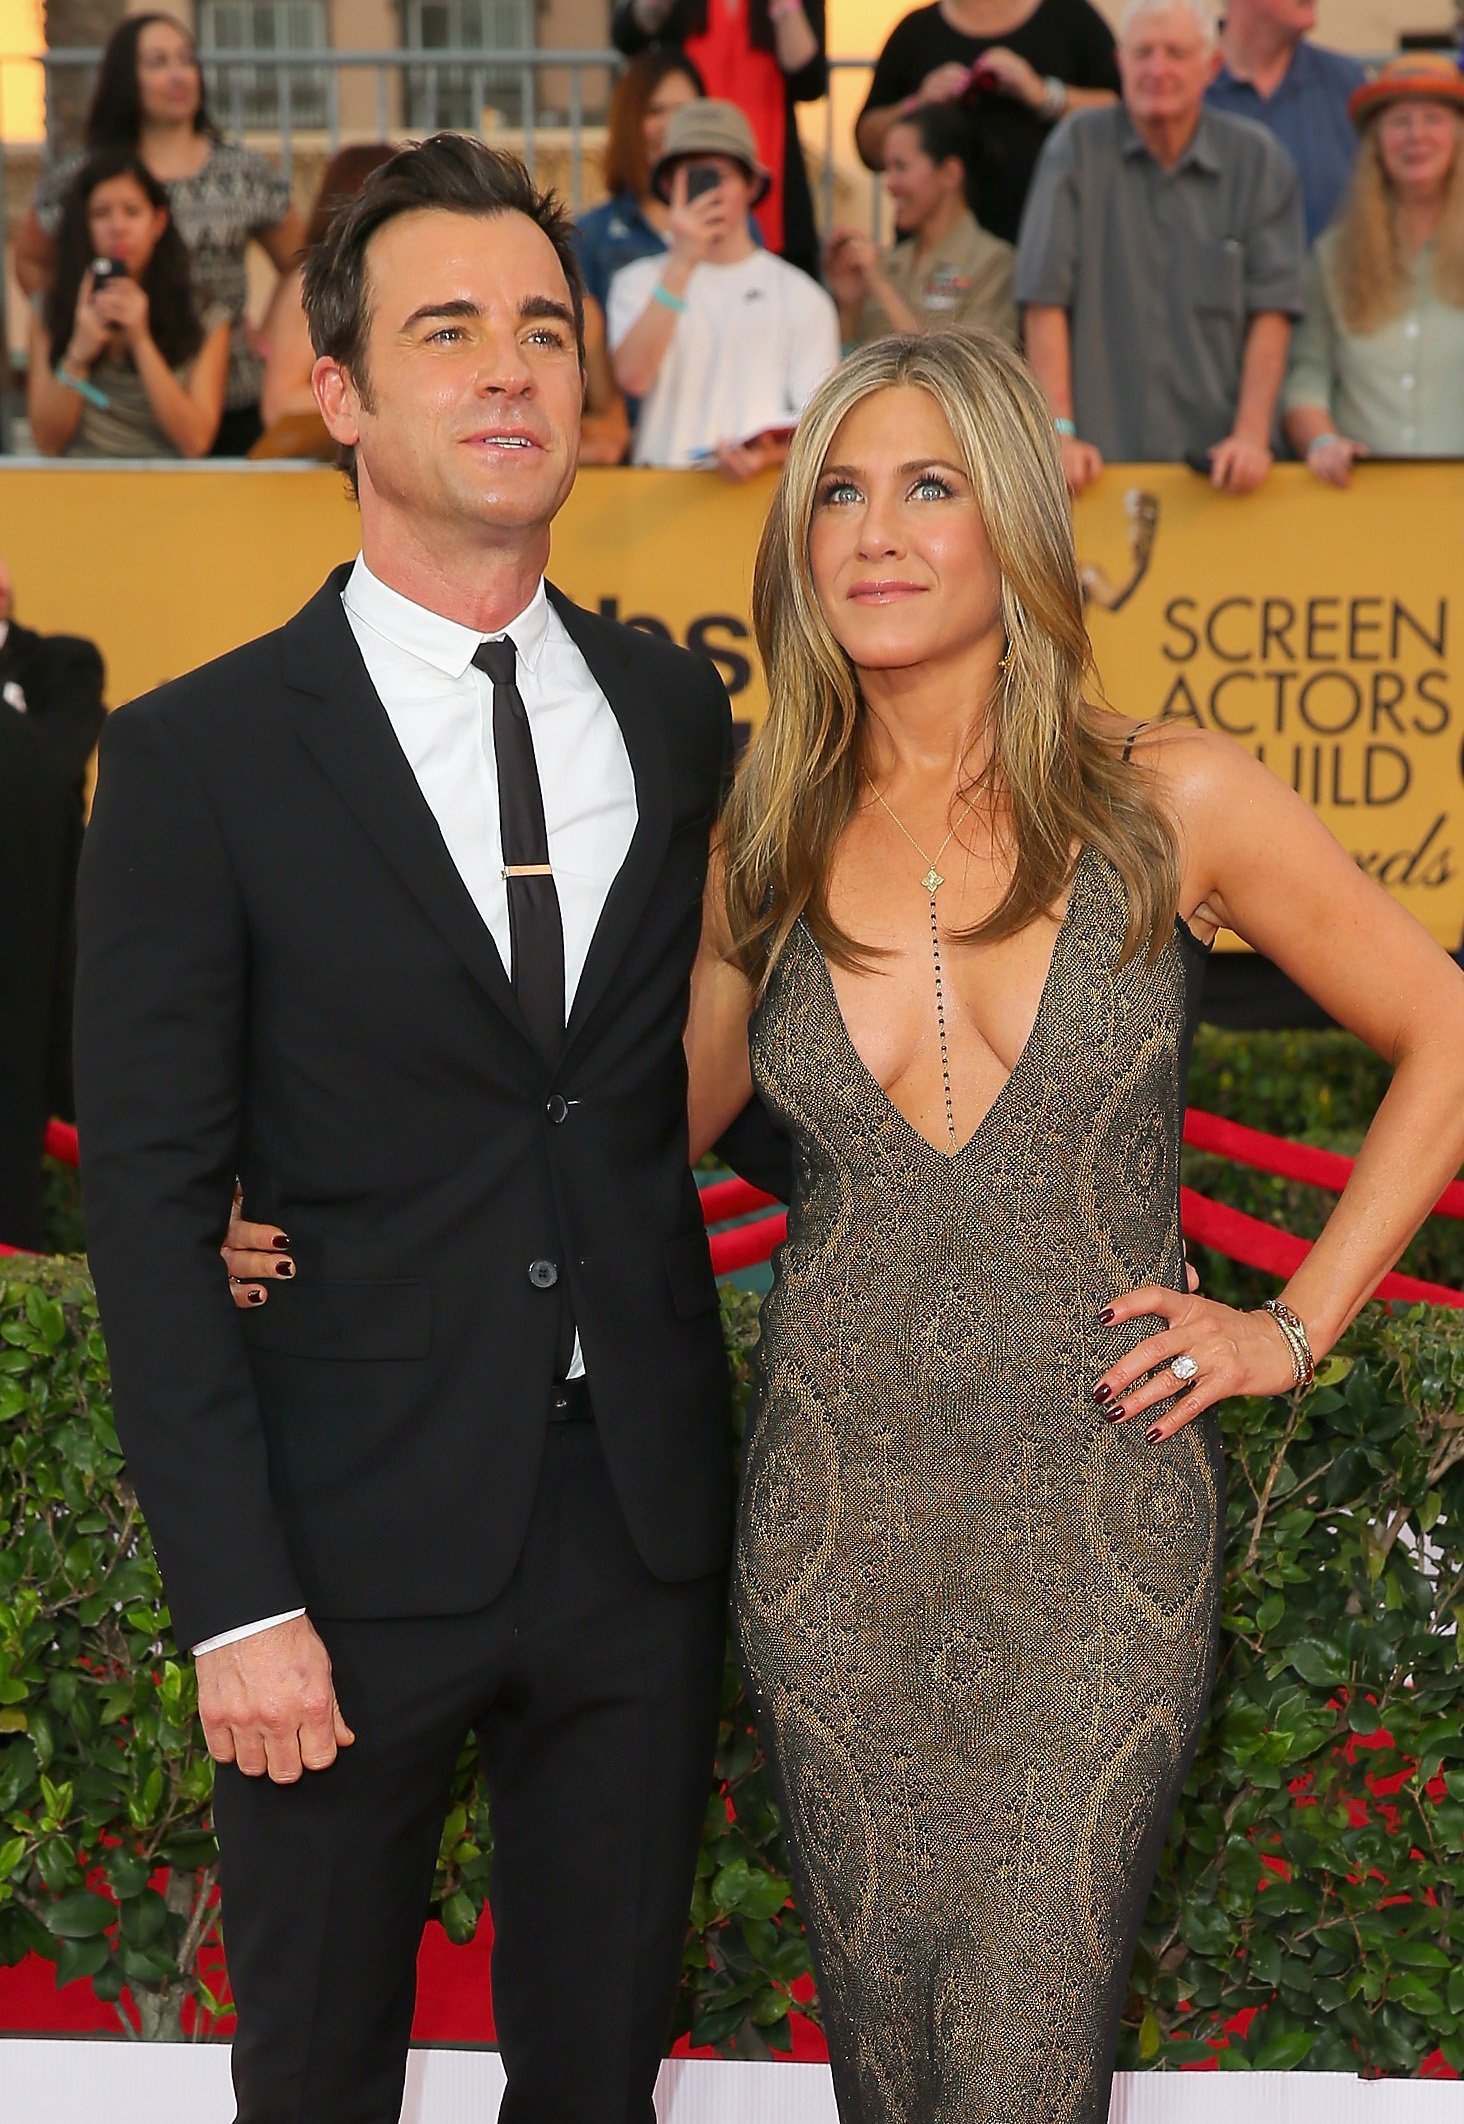 Jennifer Aniston and Justin Theroux tied the knot in an intimate ceremony at home on Wednesday, sources told People magazine.